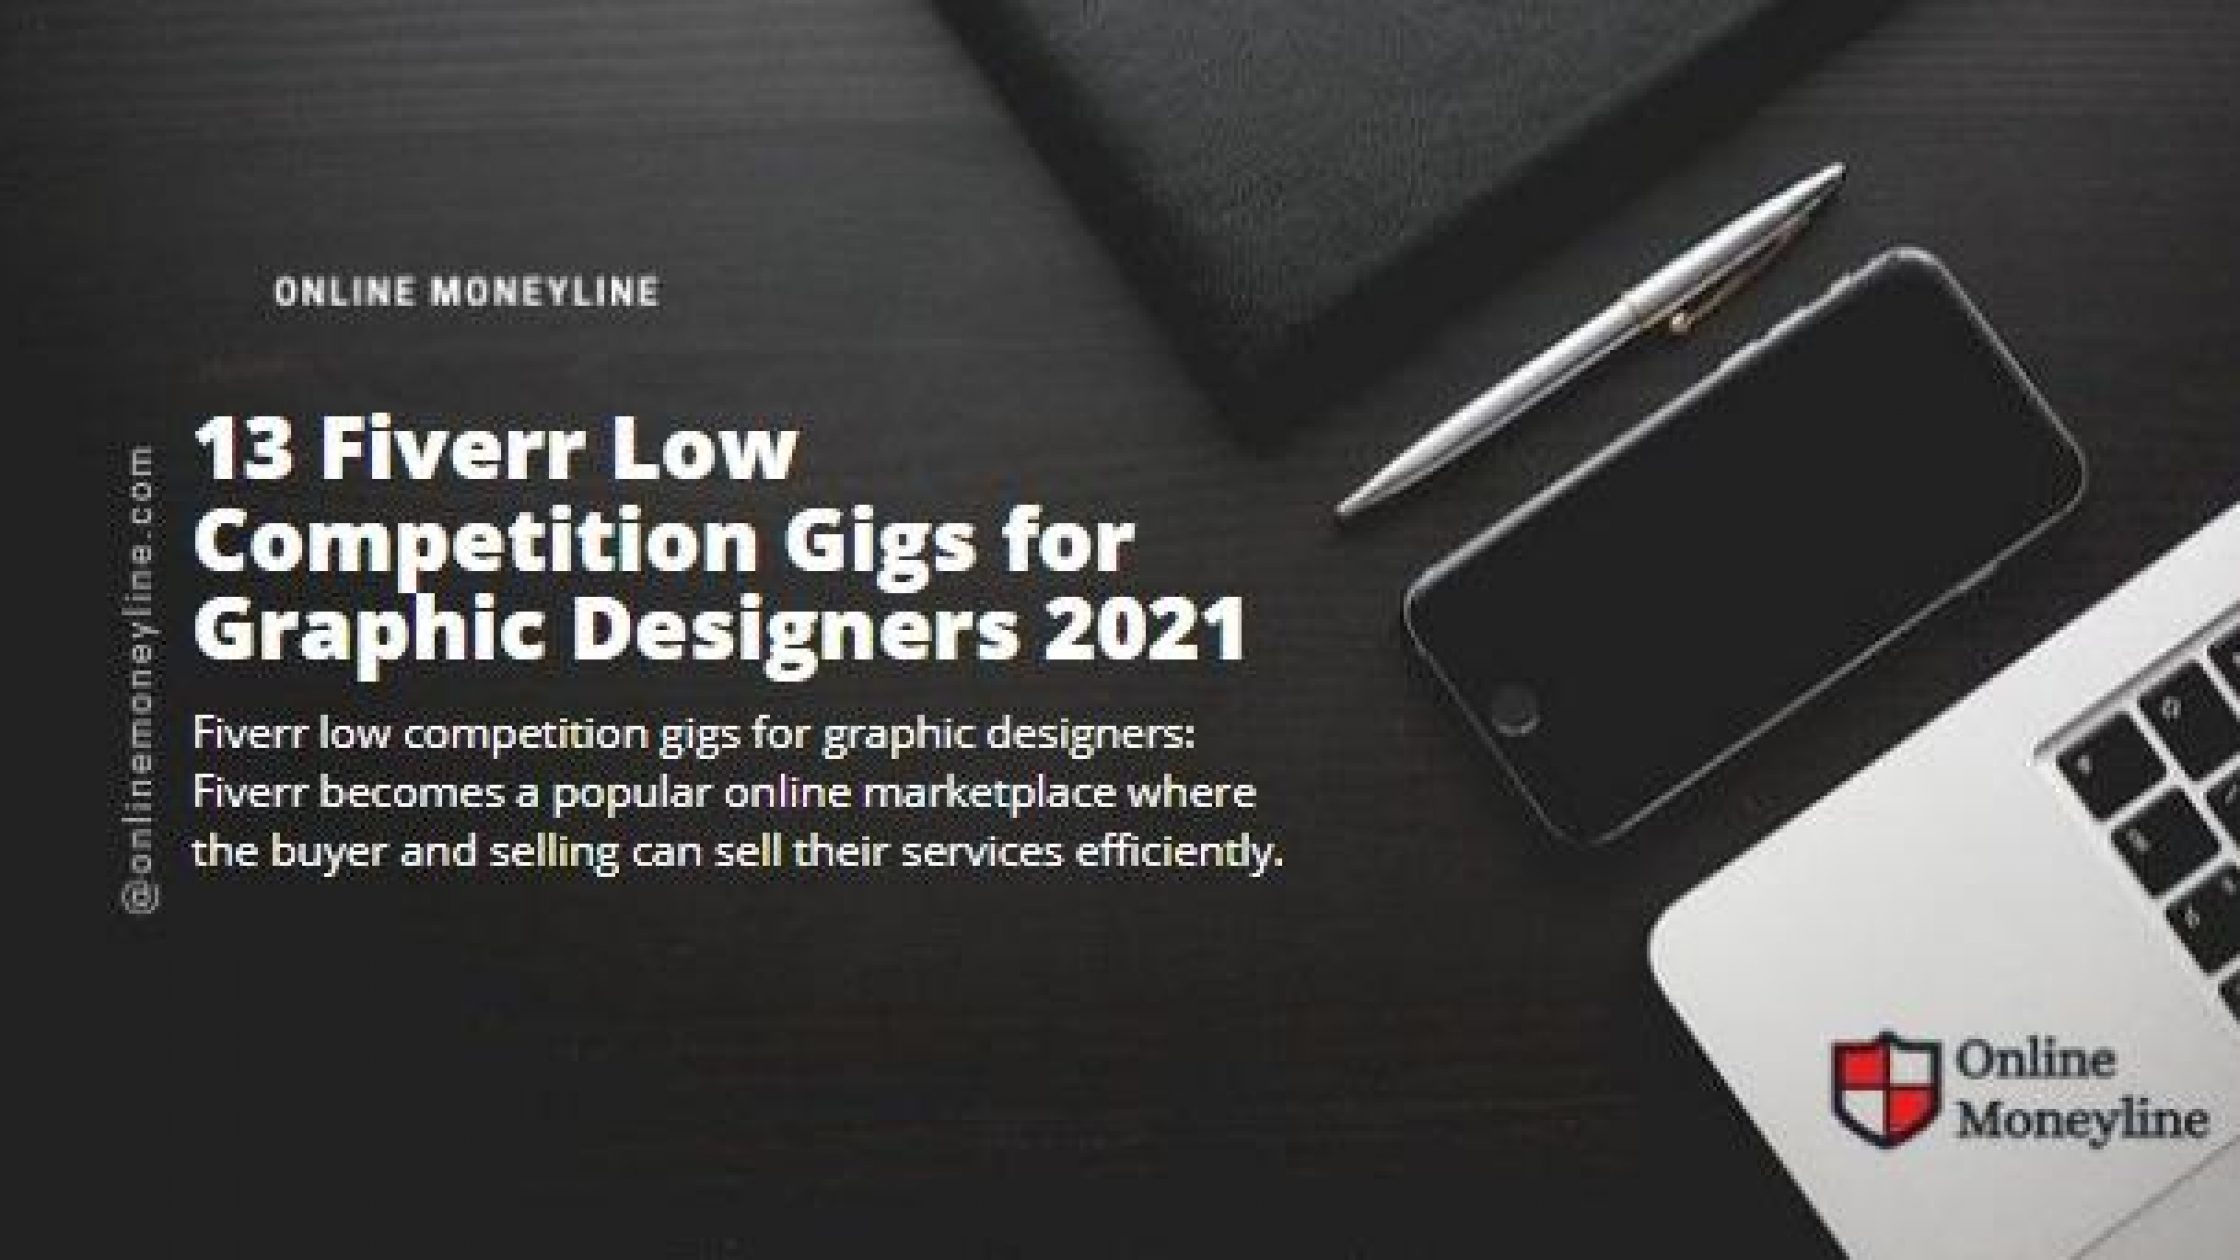 13 Fiverr Low Competition Gigs for Graphic Designers